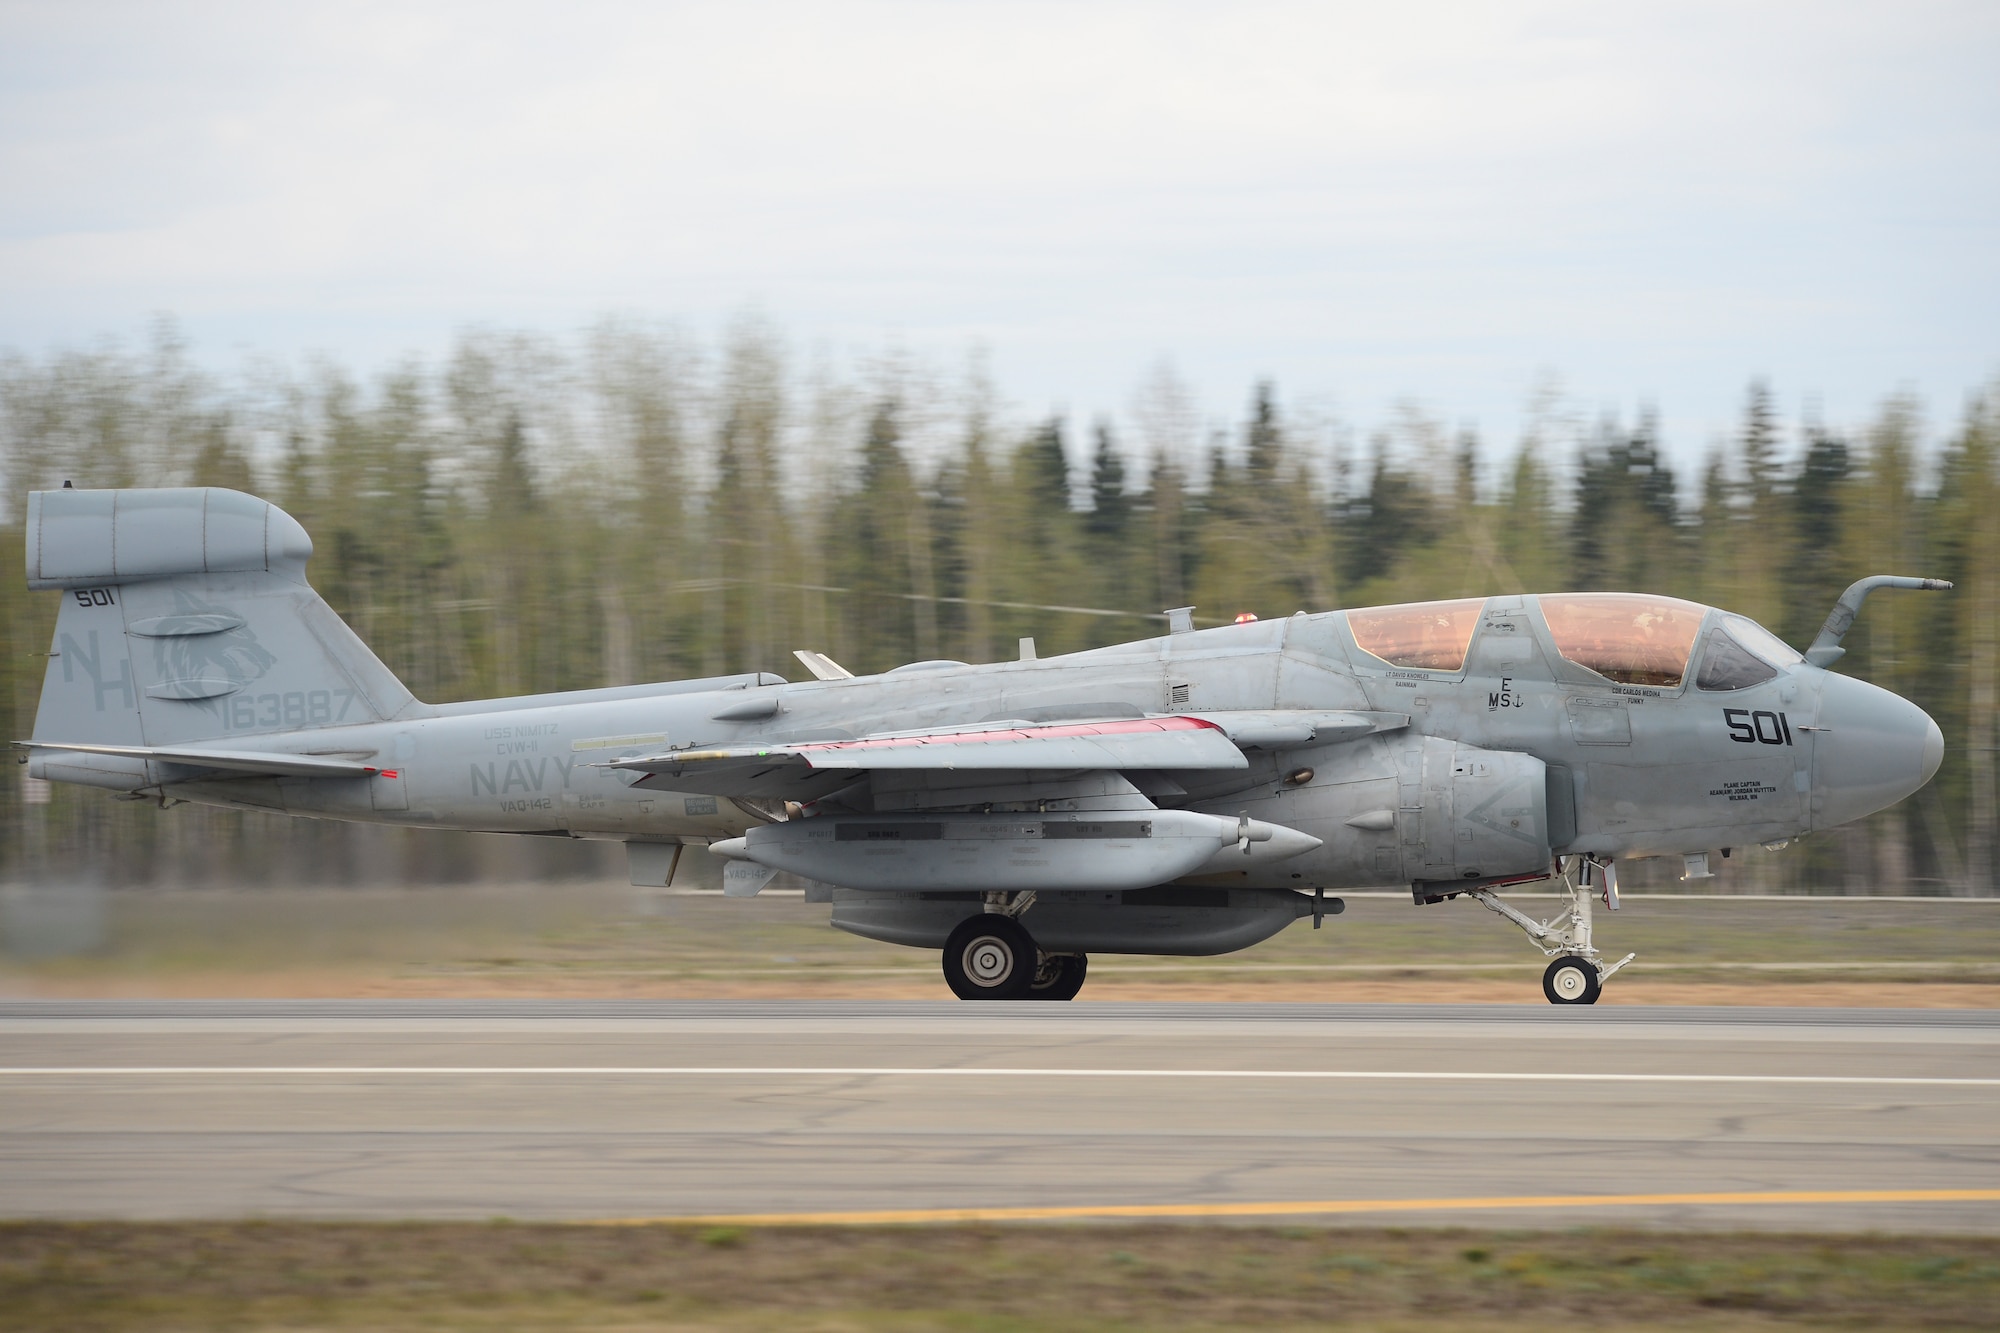 A U.S. Navy EA-6B Prowler assigned to Electronic Attack Squadron 142, Naval Air Station Whidbey Island, Wash., takes off during RED FLAG-Alaska 14-1 May 13, 2014, Eielson Air Force Base, Alaska. The EA-6B is a fully integrated electronic warfare system combining long-range, all-weather capabilities with advanced electronic countermeasures. (U.S. Air Force photo by Senior Airman Peter Reft/Released)